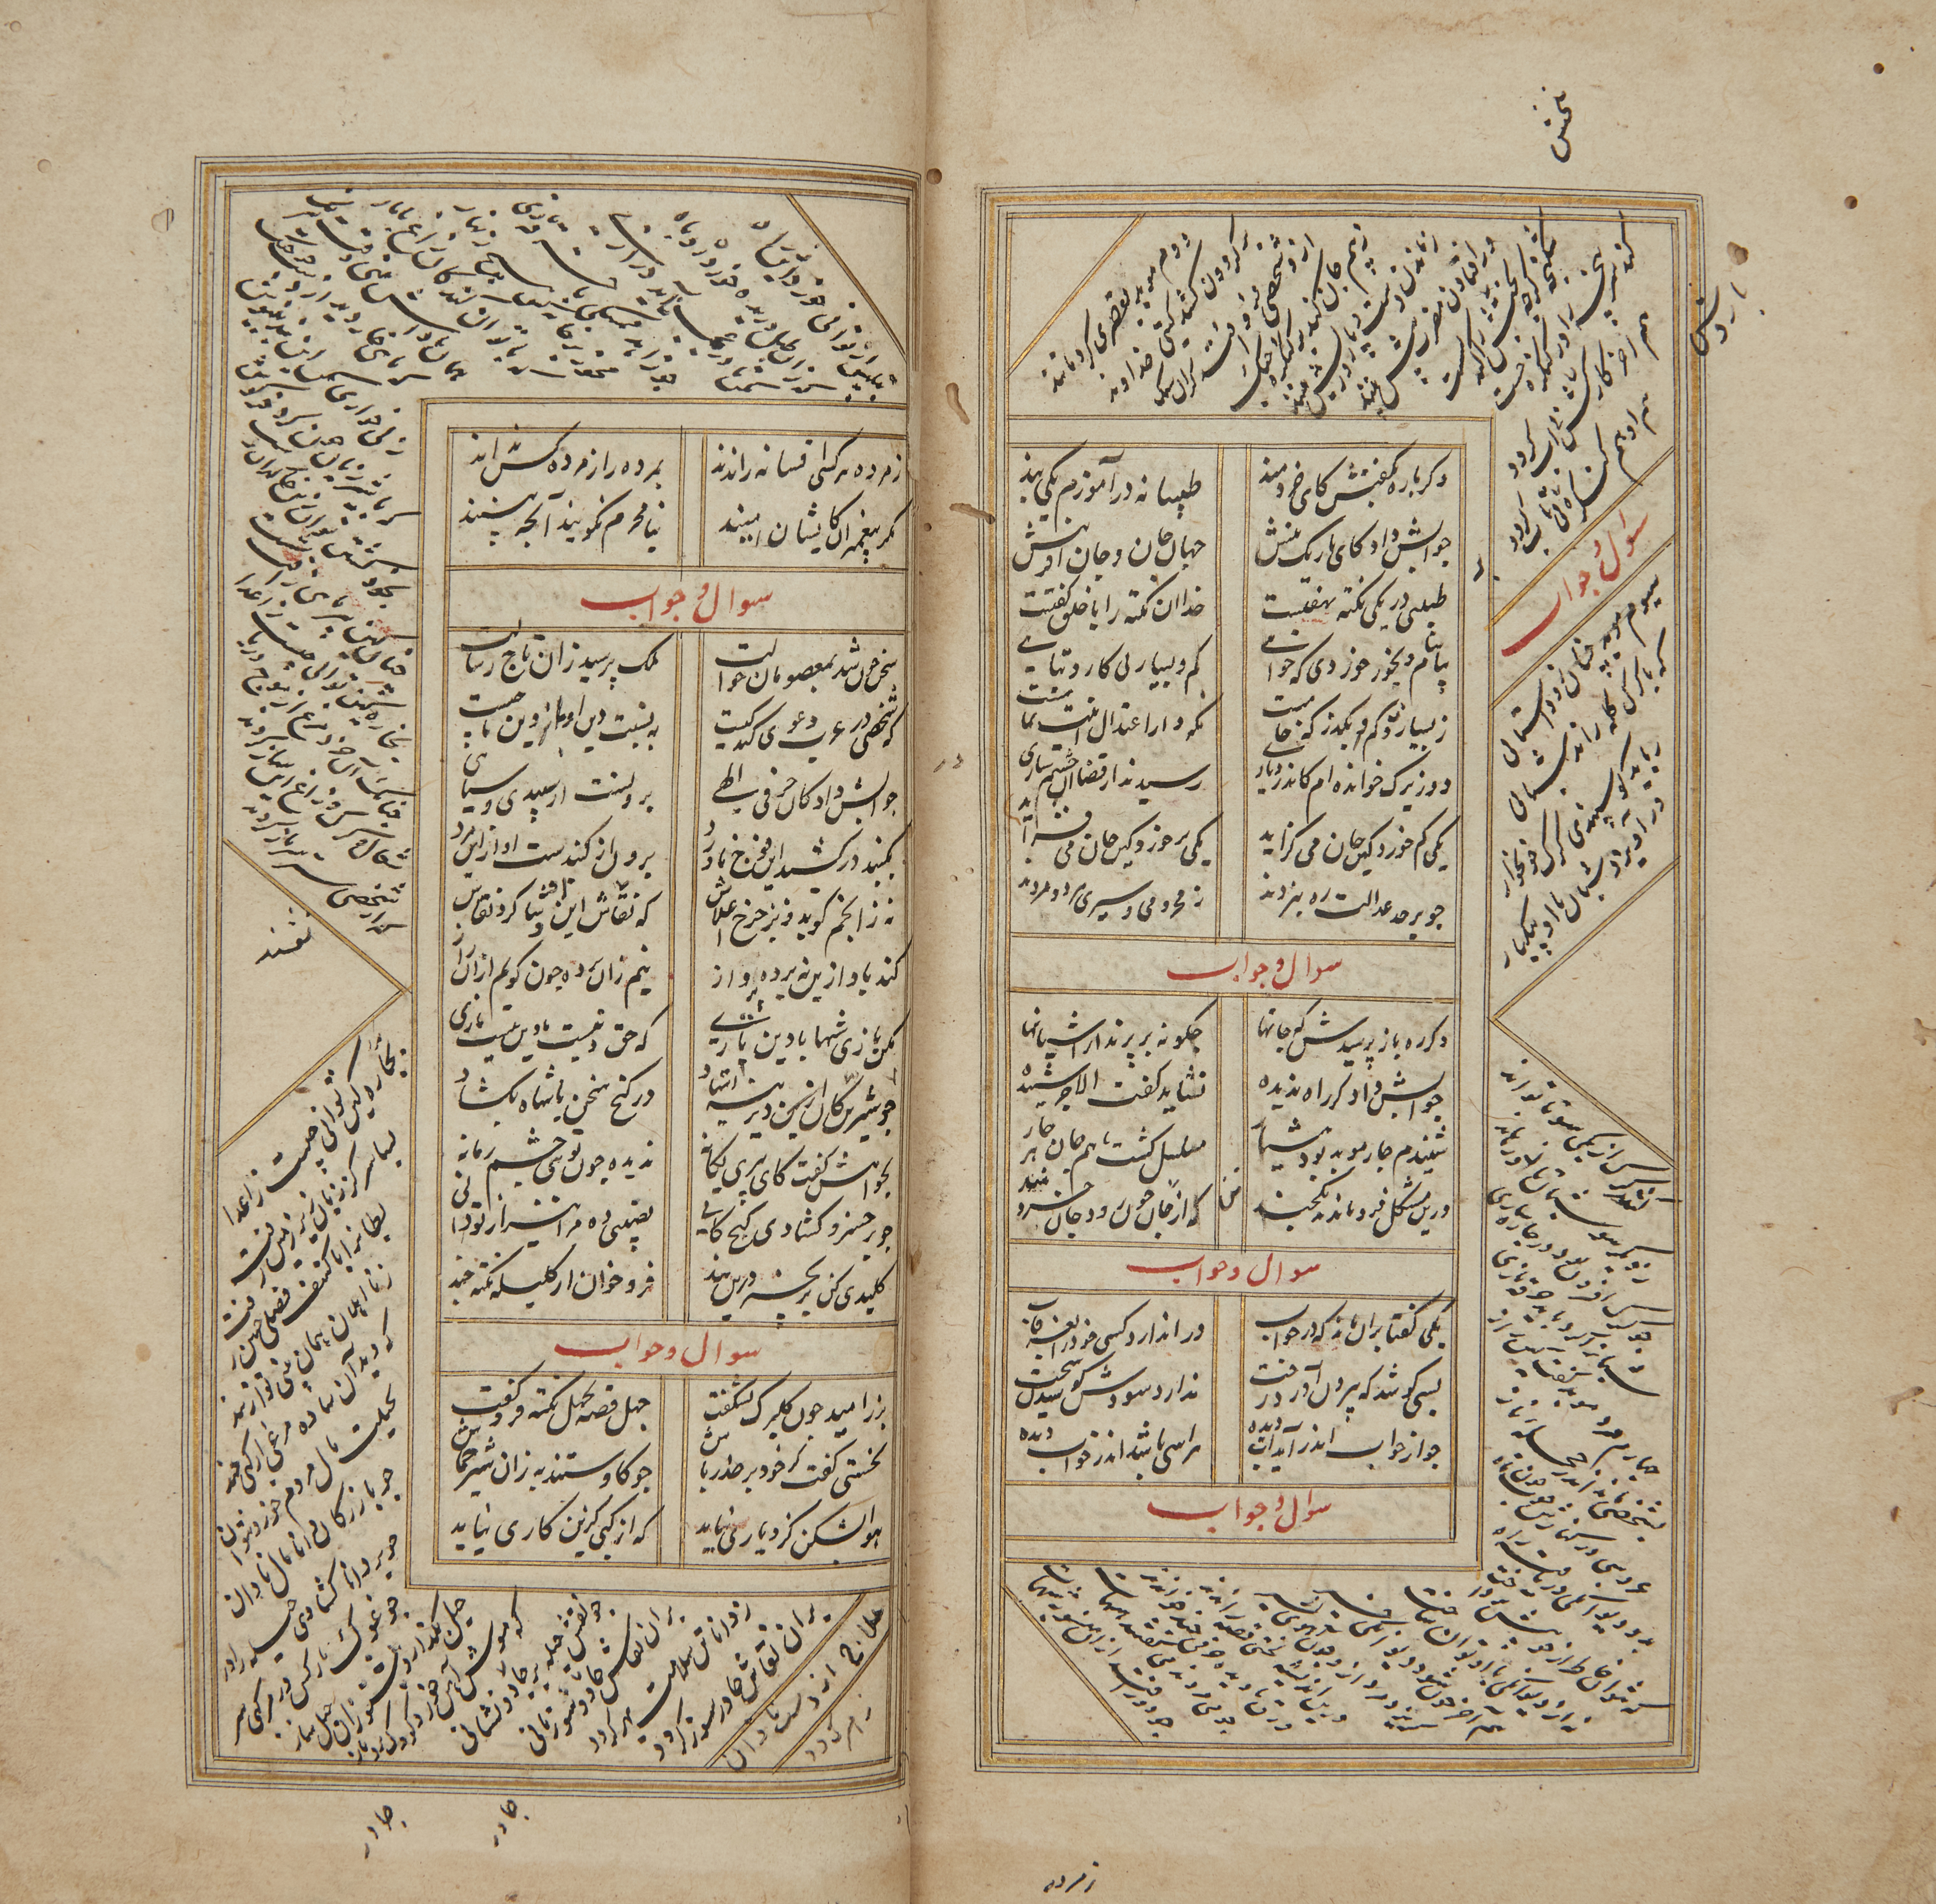 A collection of Persian verses,Safavid Iran, late 17th-early 18th centuryPersian manuscript on pa... - Image 2 of 4